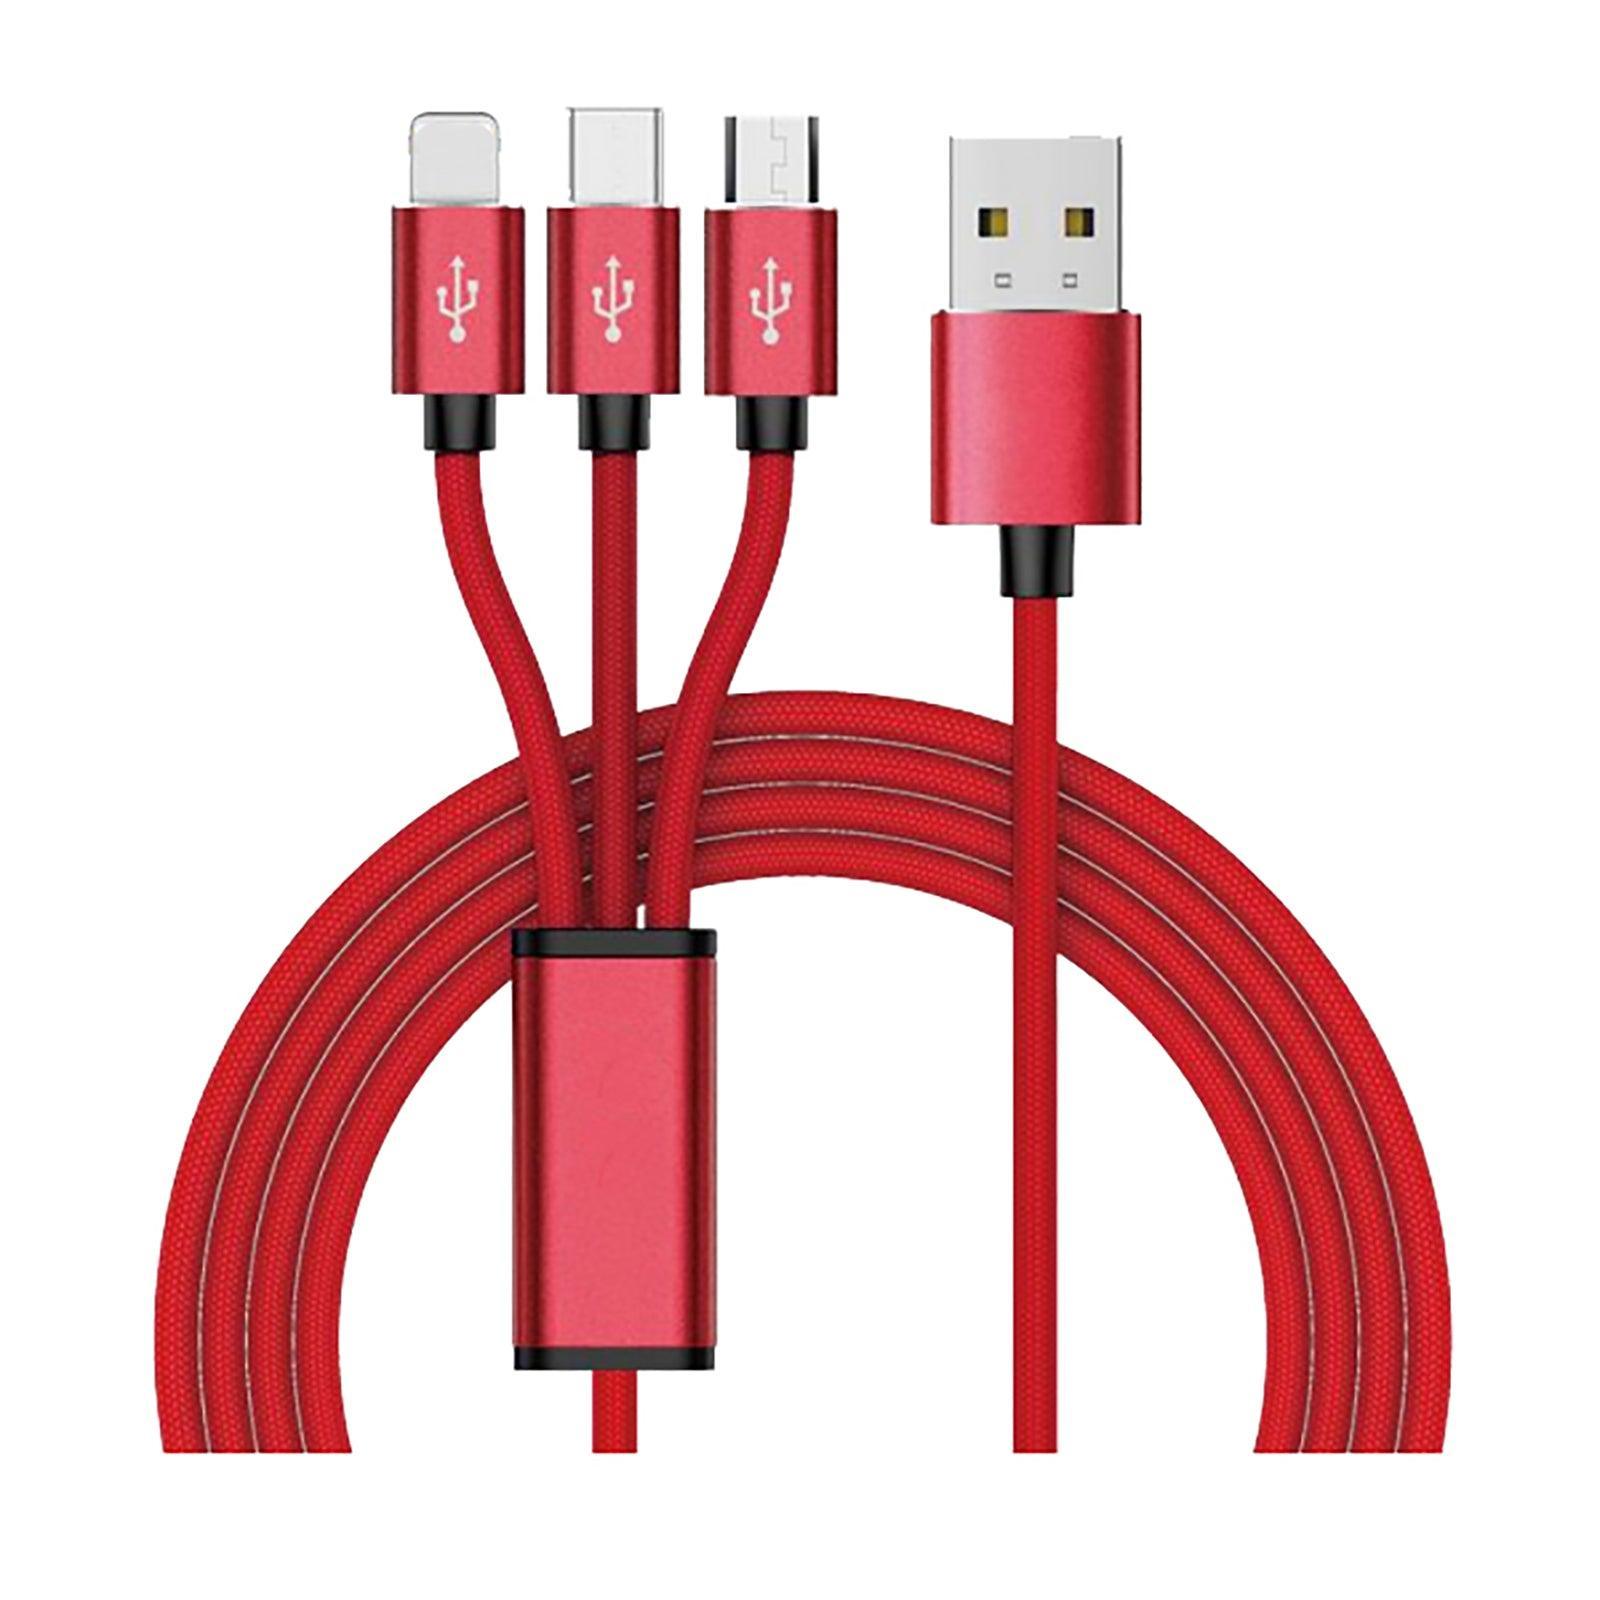 Mione XR03 1.5m 3 in 1 Premium Nylon Braided Charging Cable